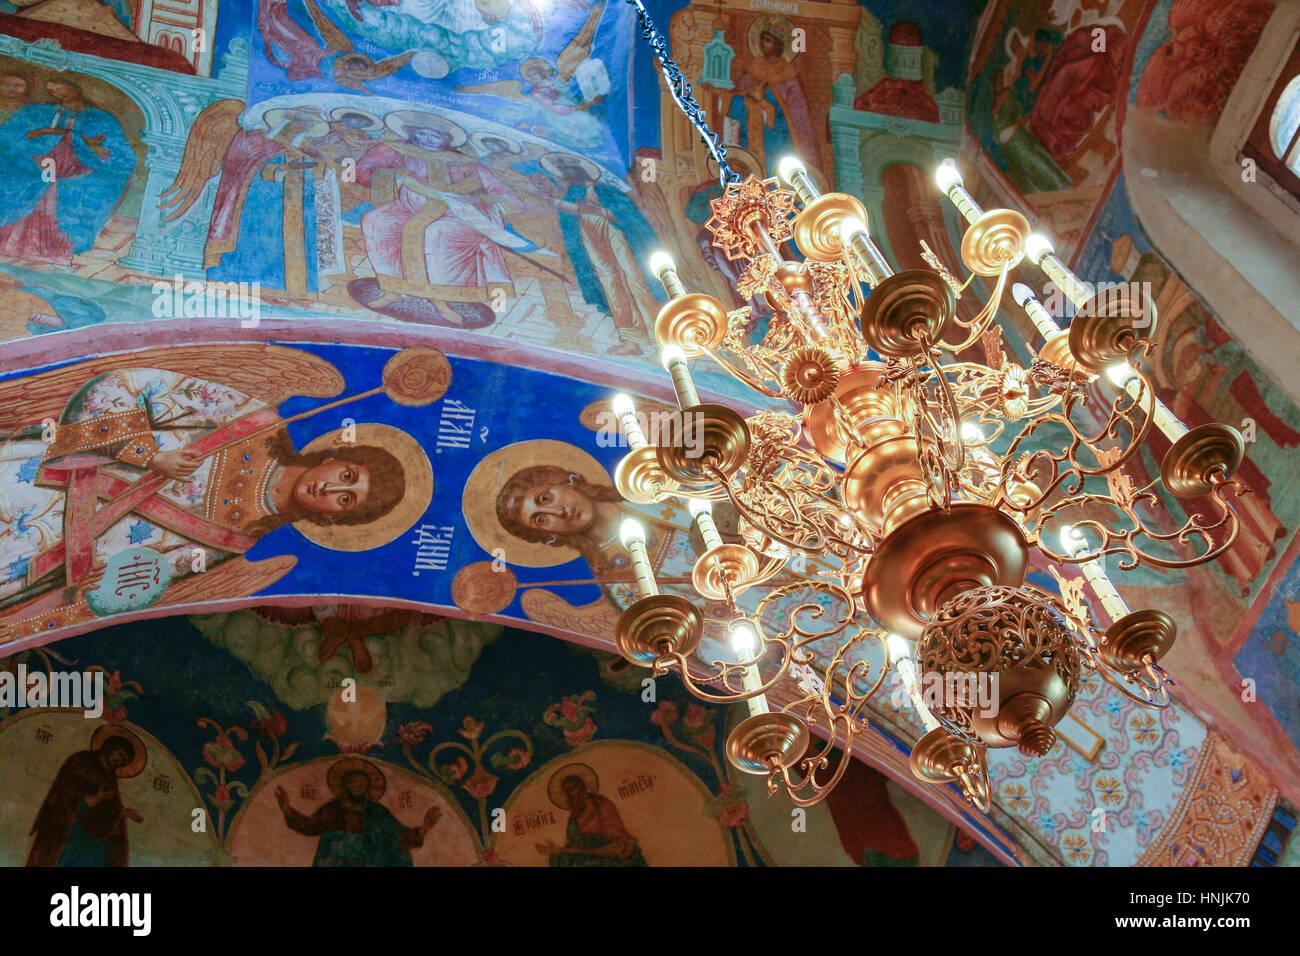 Chandelier and frescoes inside the Transfiguration Cathedral  of the Saviour Monastery of St. Euthymius, Russia, Suzdal Stock Photo